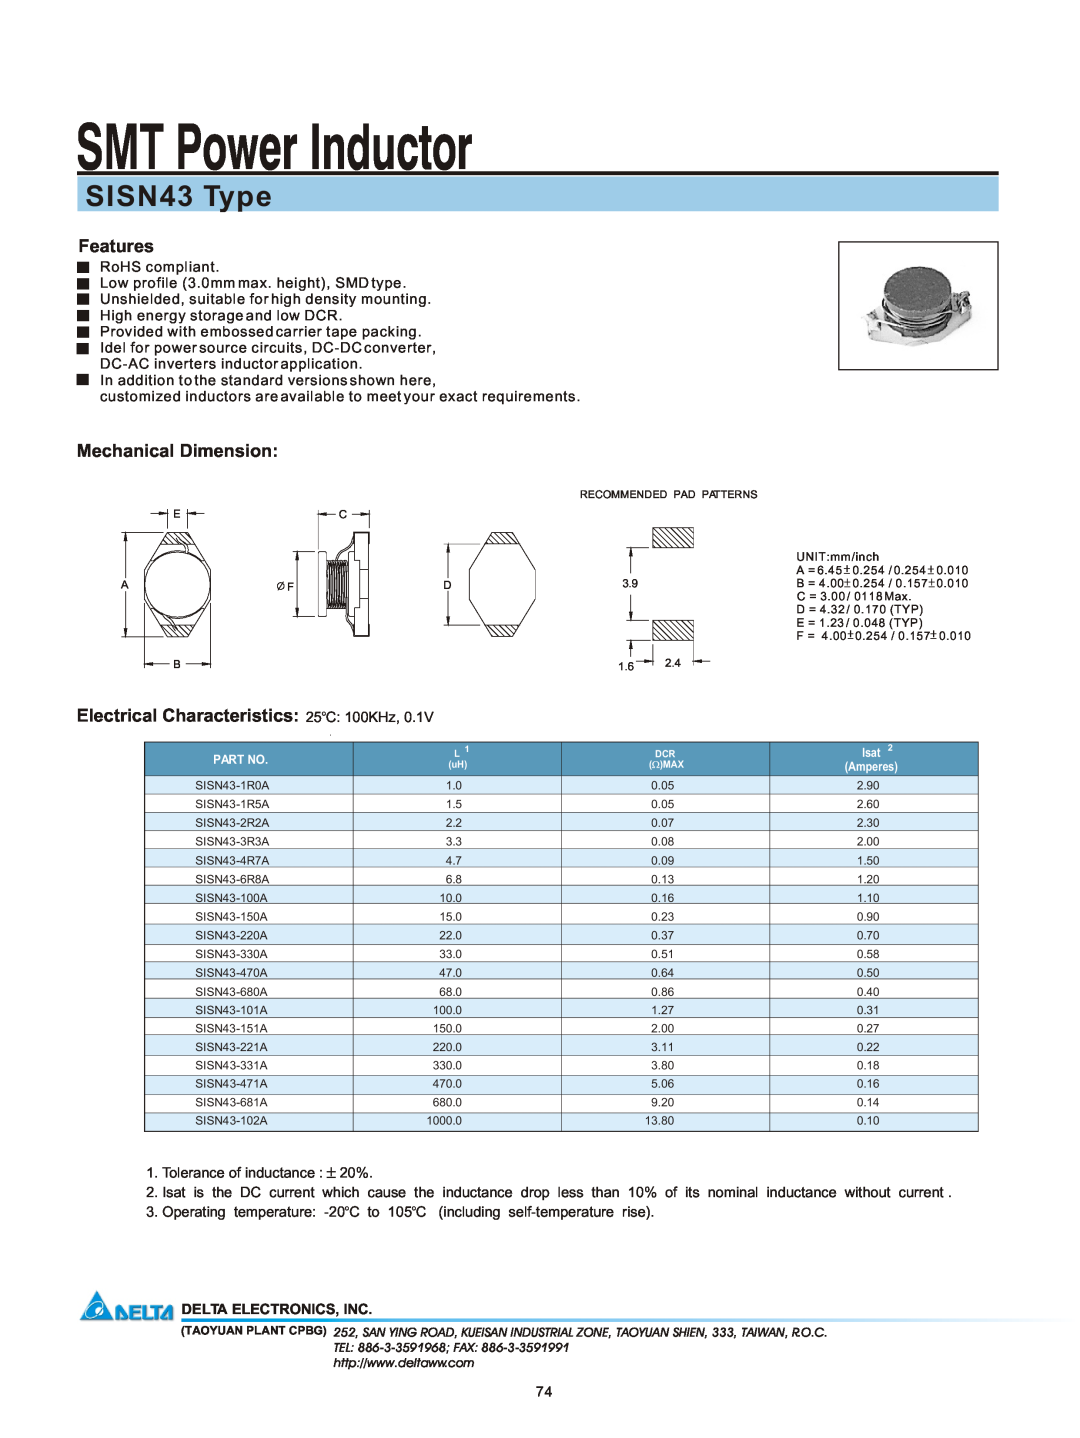 Delta Electronics manual SMT Power Inductor, SISN43 Type, Features, Mechanical Dimension, Delta Electronics, Inc 